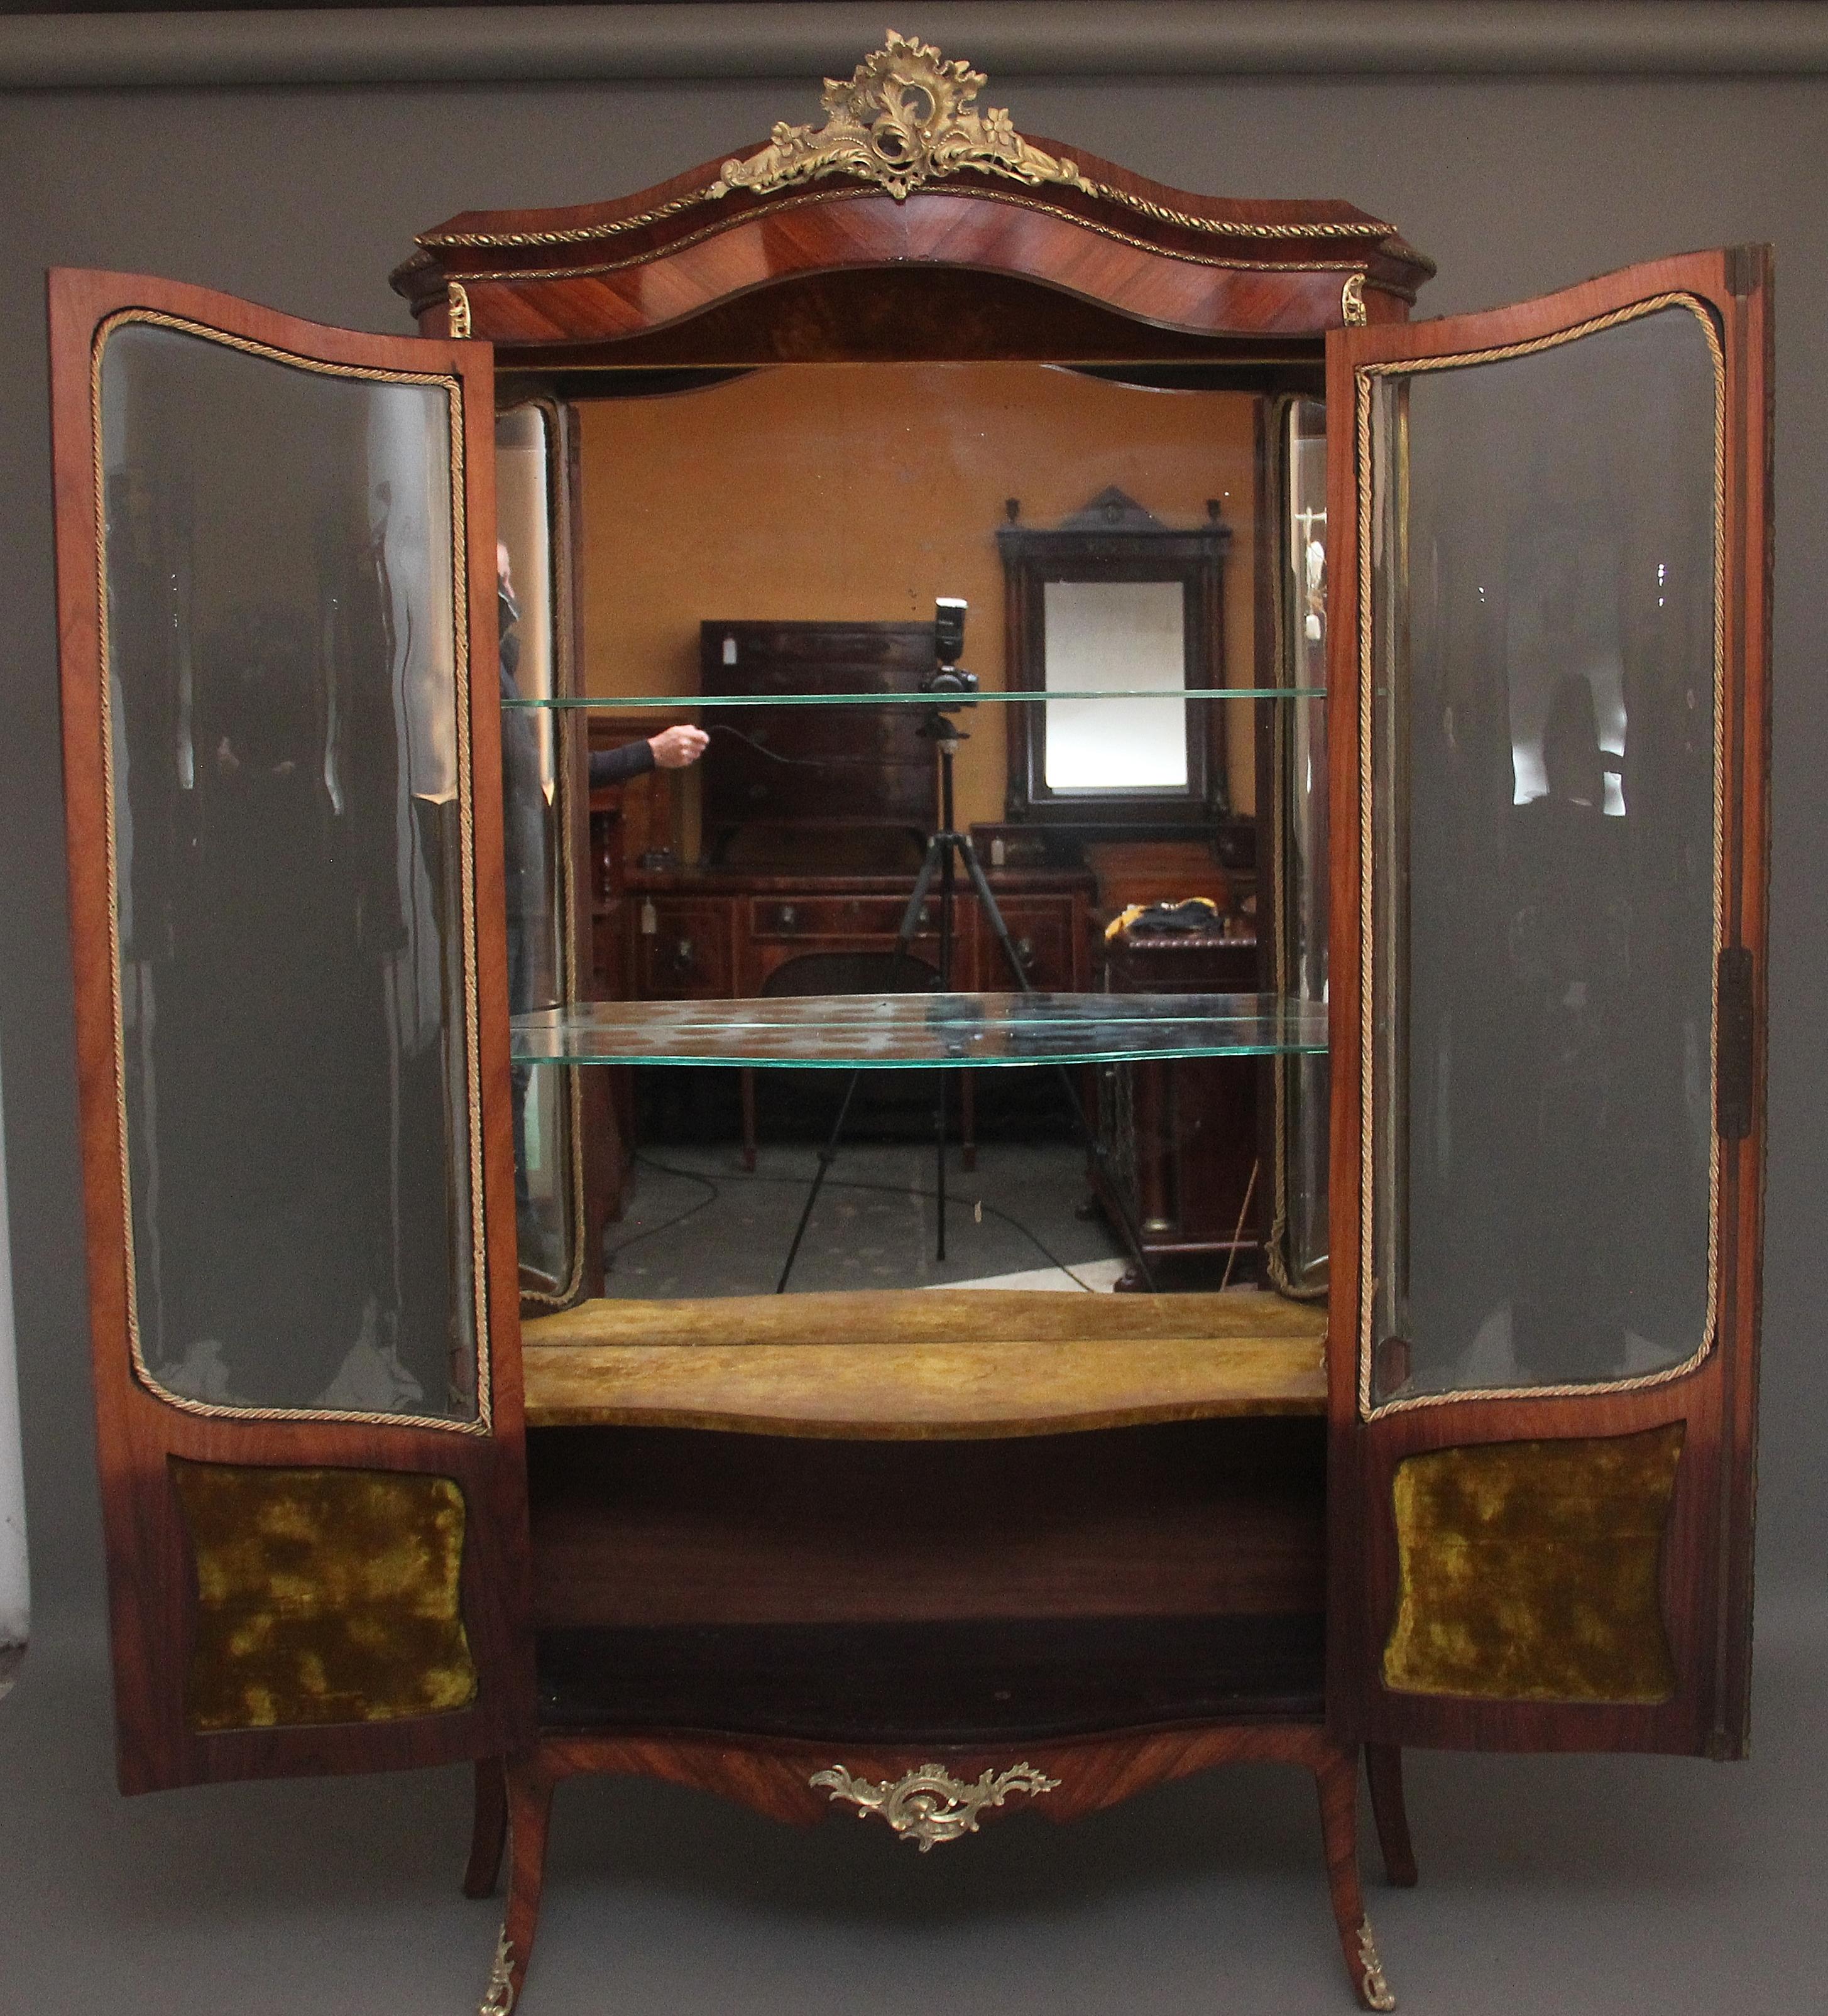 A fabulous quality 19th Century French Kingwood and ormolu mounted display cabinet / vitrine in the Louis XV style, the shaped top with ormolu beading along the edge and a highly decorative large floral ormolu mount at the centre above two shaped